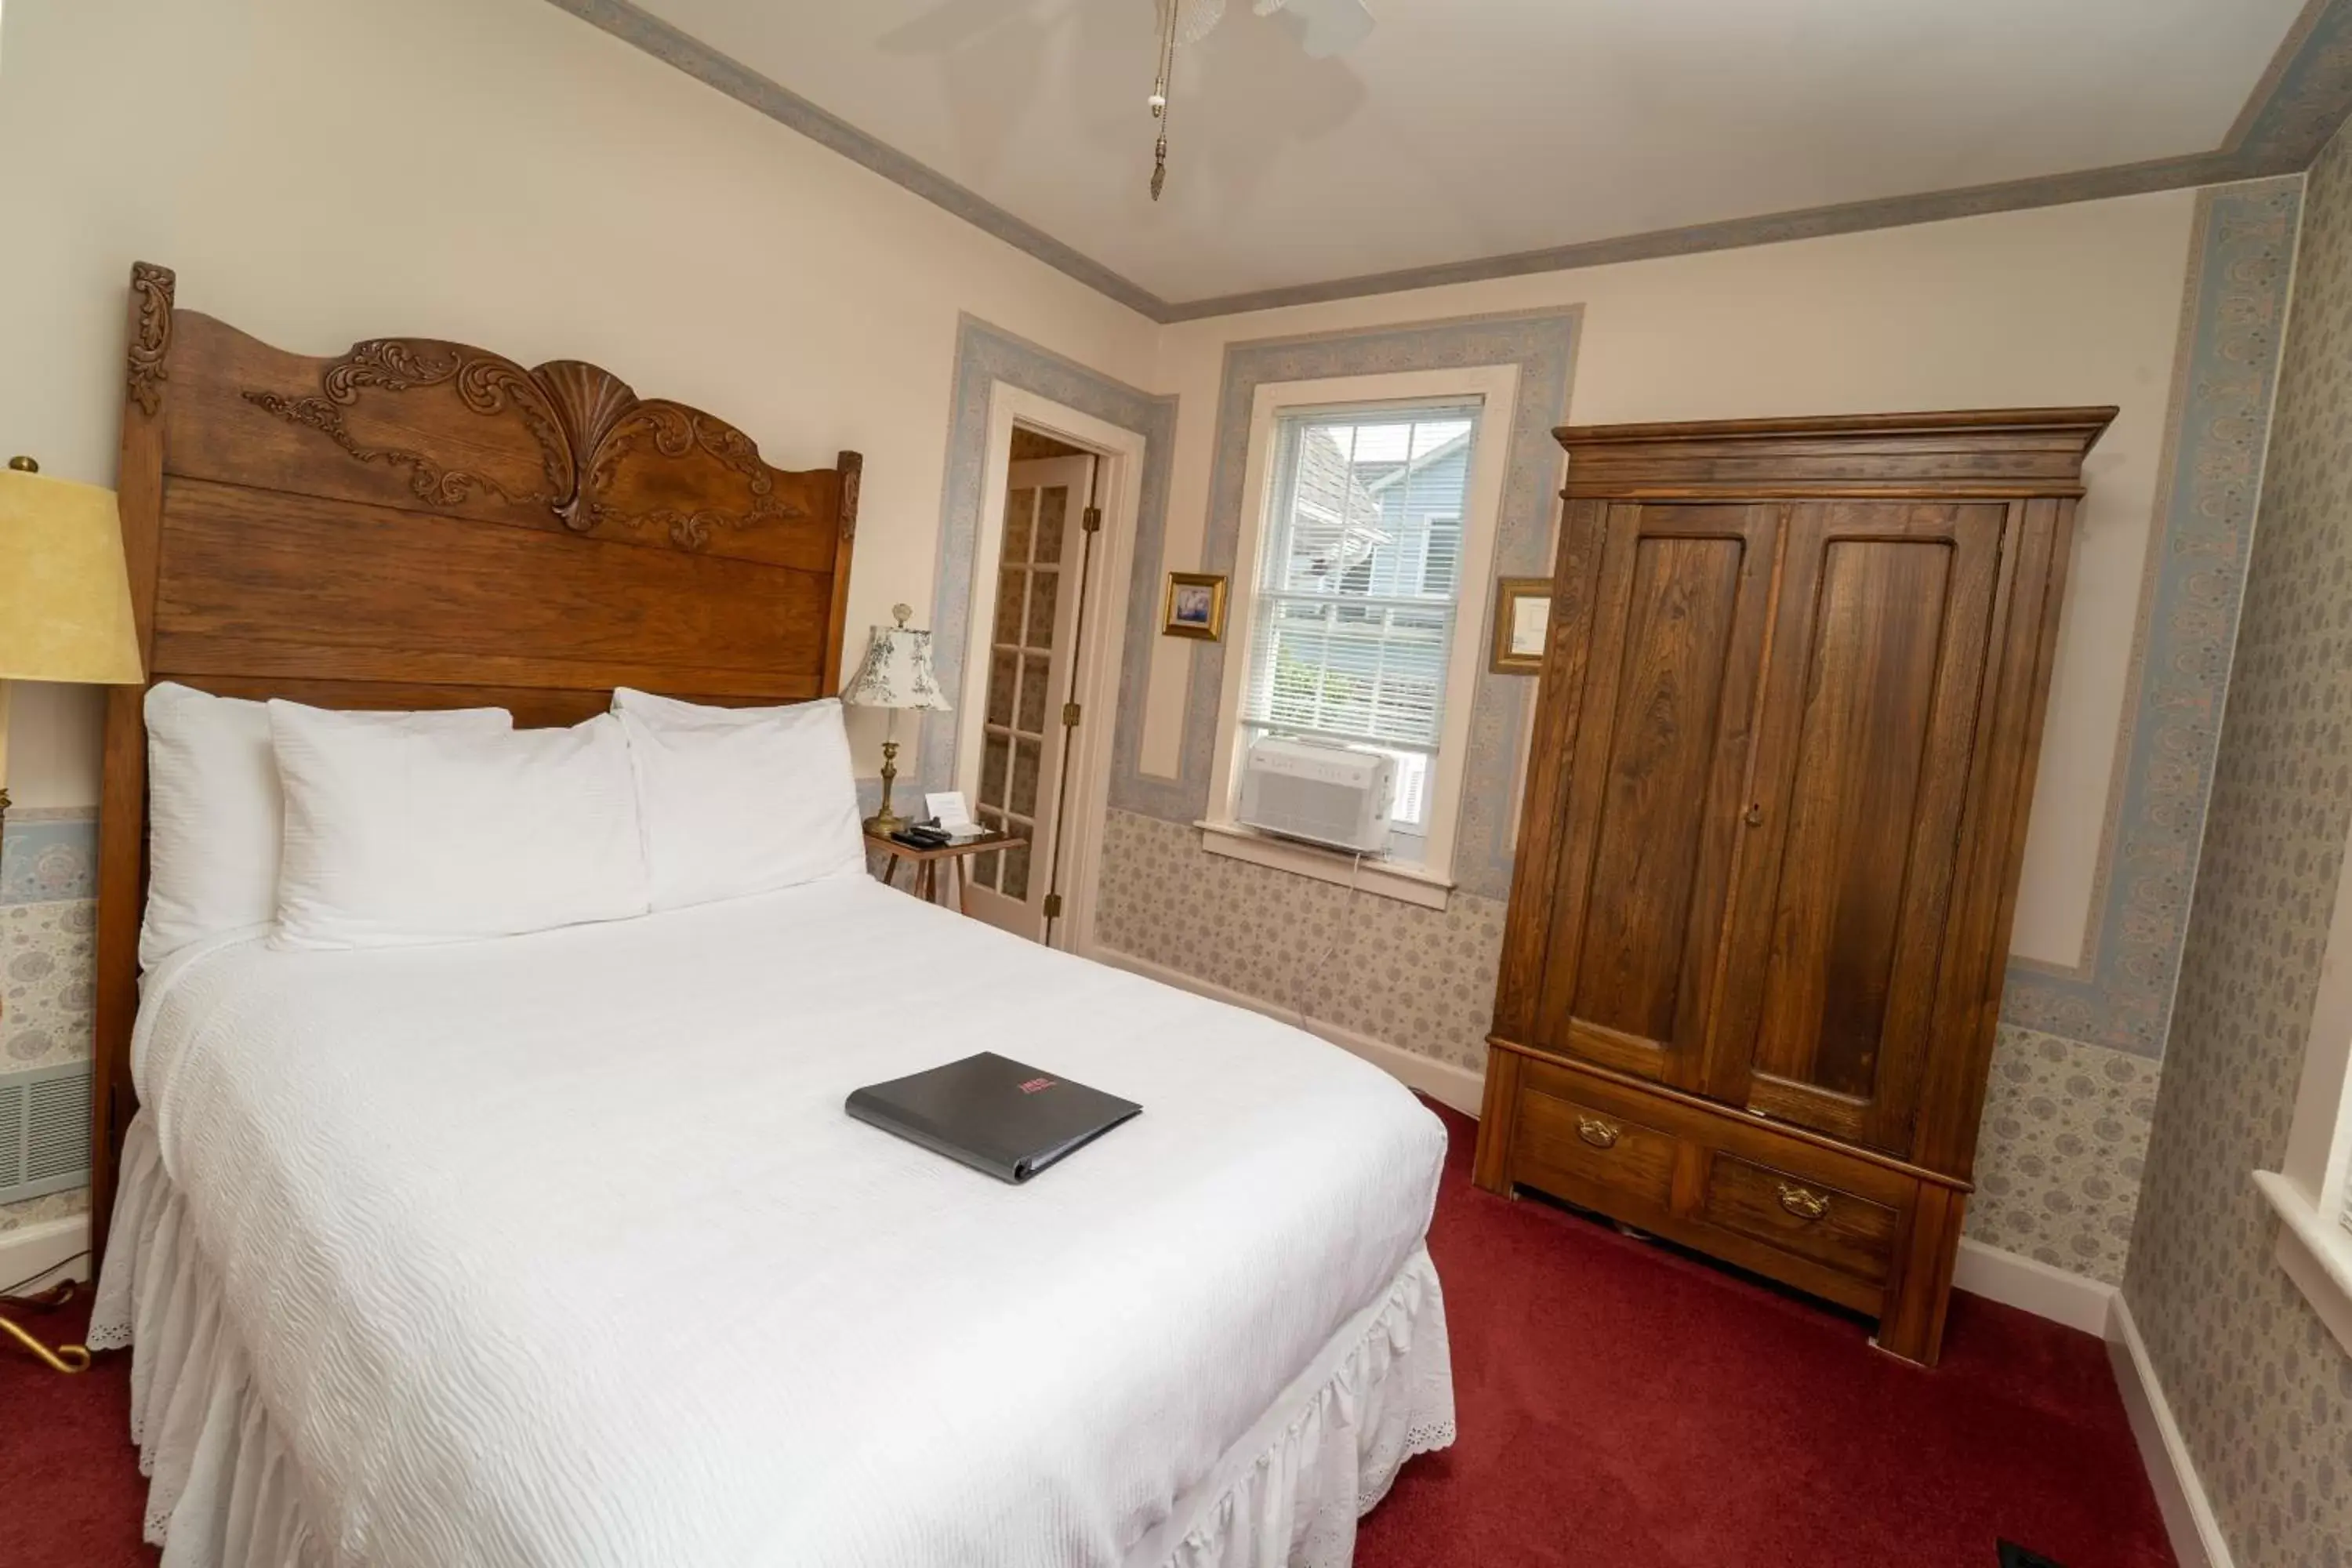 Double Room in Yelton Manor Bed and Breakfast